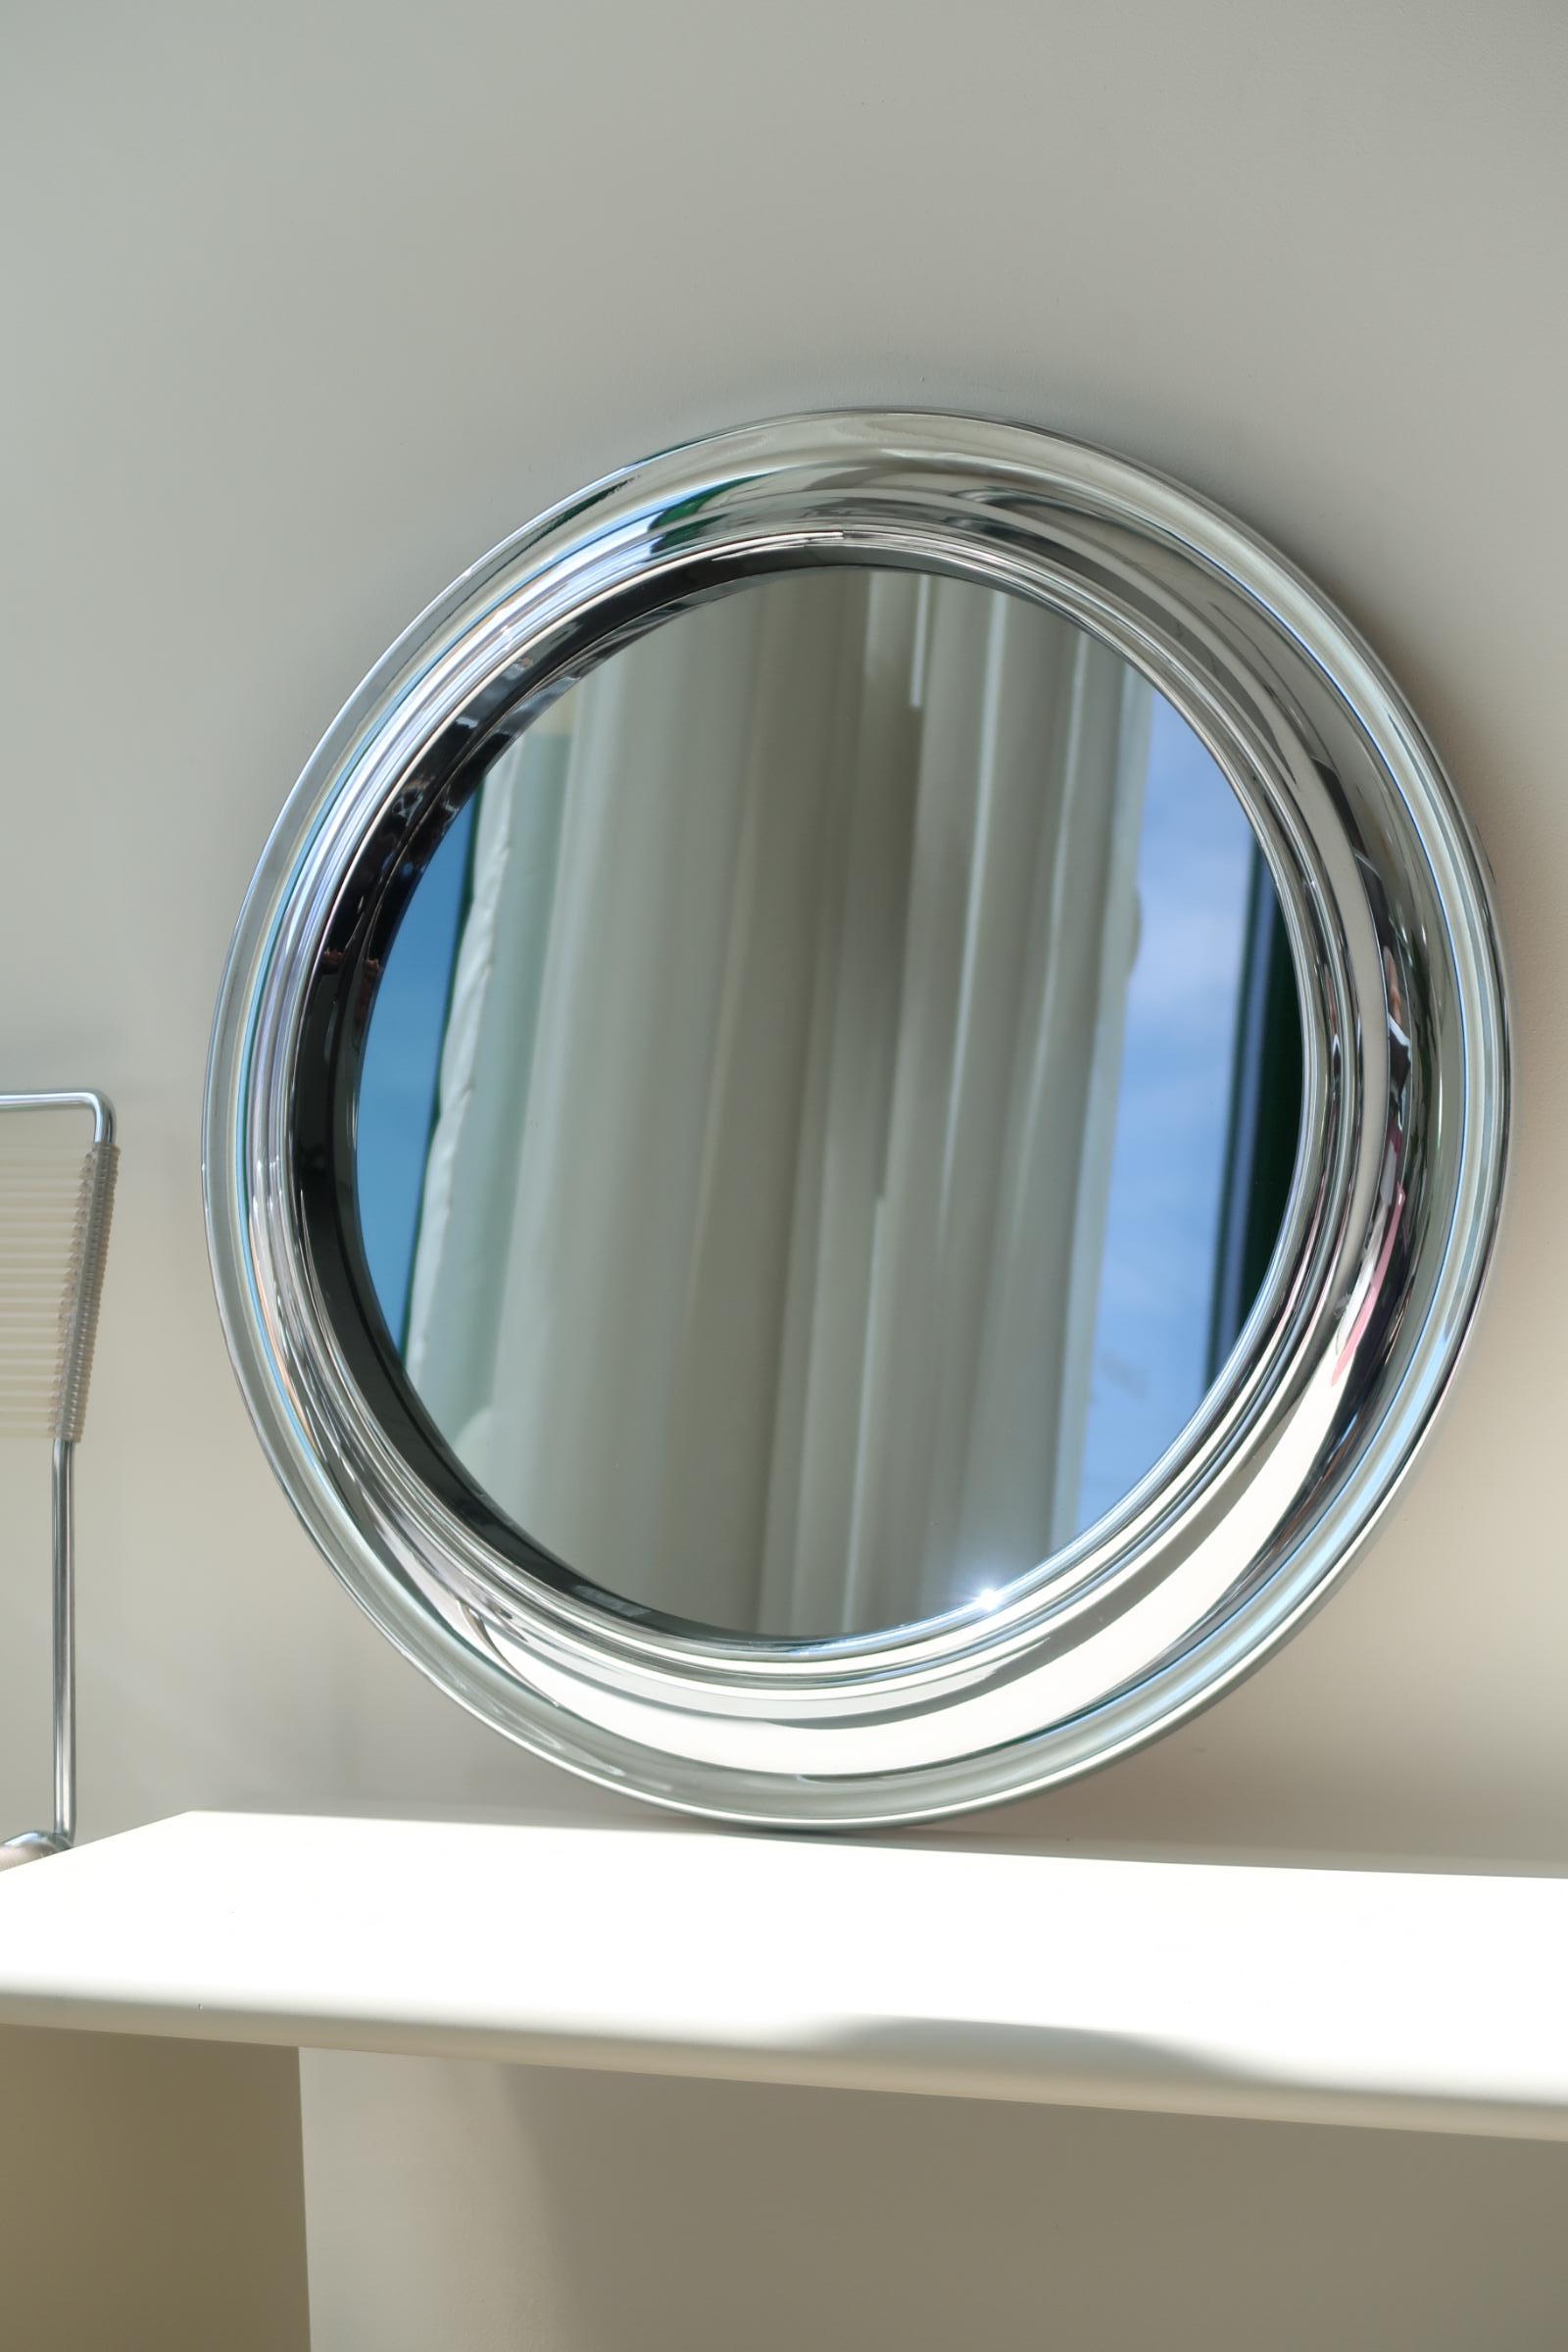 Vintage Italian Space Age mirror in chrome plastic with tinted glass. Designed or inspired by Sergio Mazza for Artemide. Produced in Italy, 1970s, and appears with normal age-related patina. Perfect size for bathroom or entrance hall. Come by our